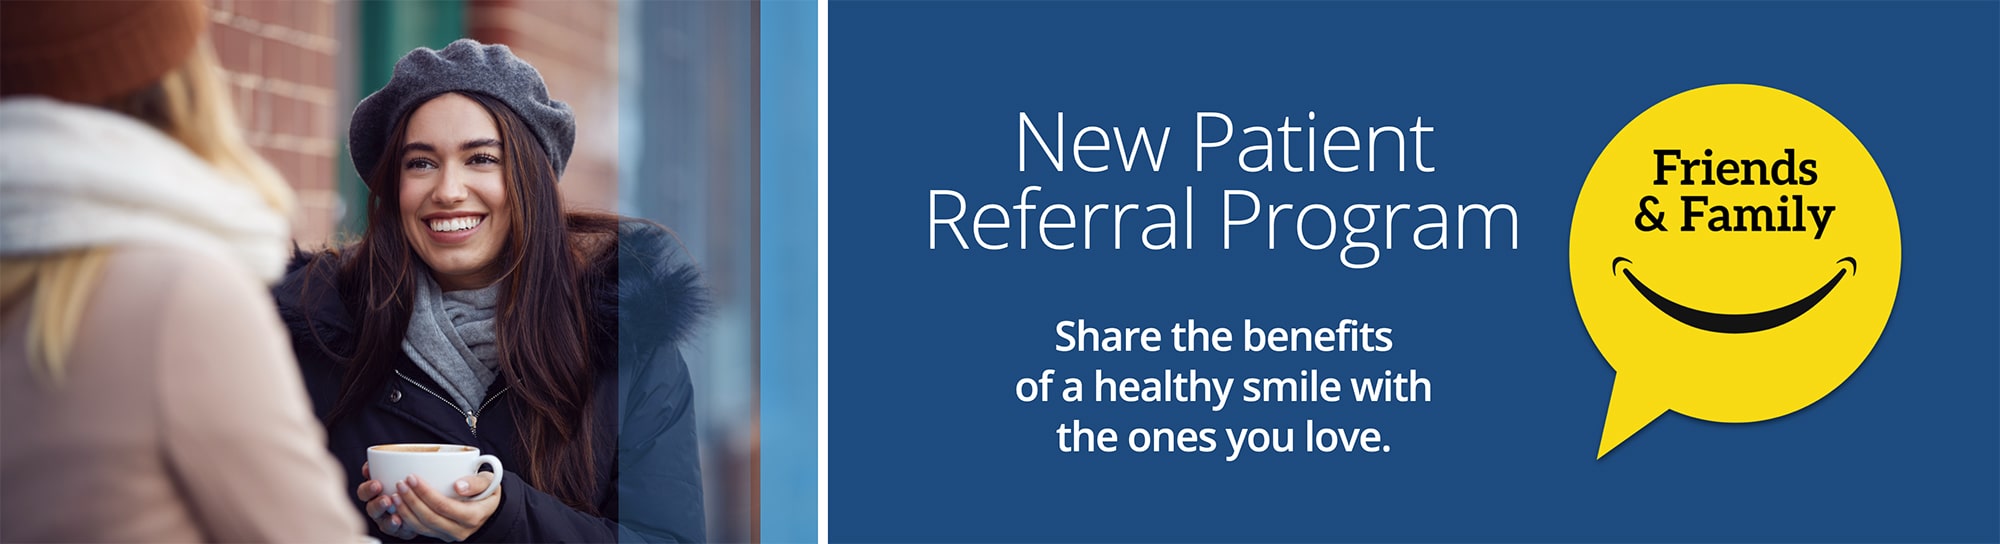 new patient referral banner